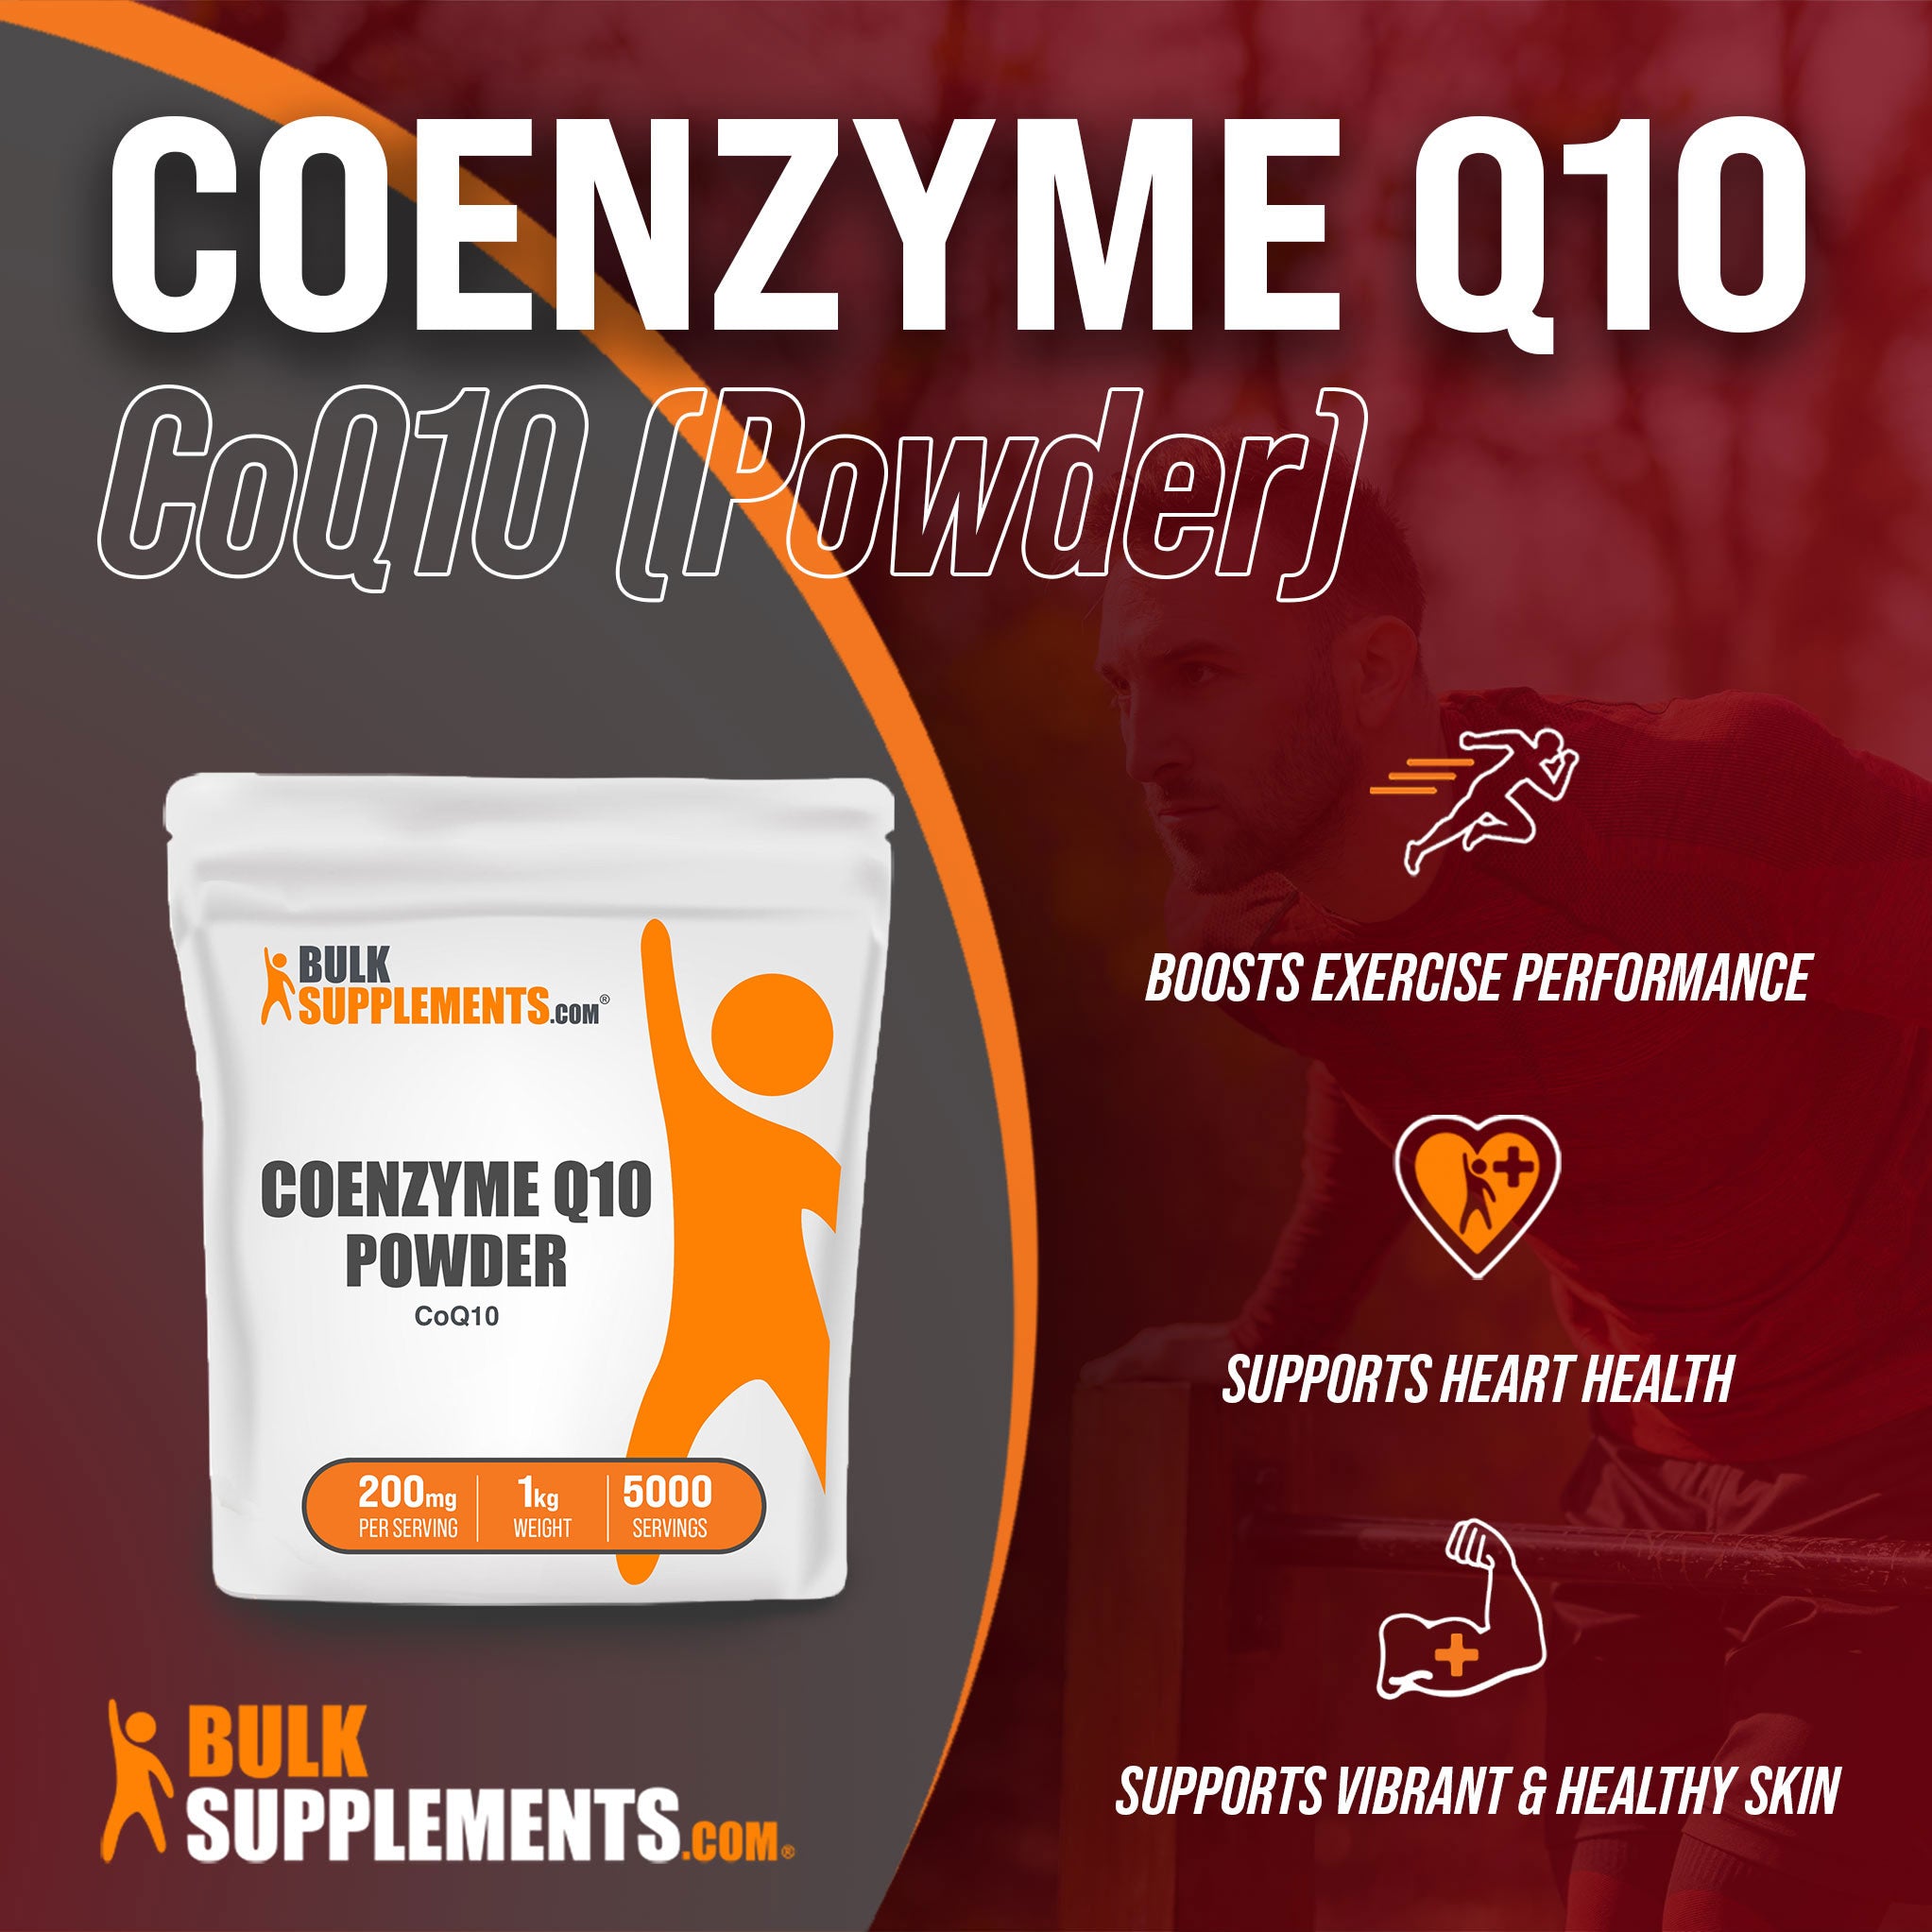 Benefits of Coenzyme Q10 CoQ10 Powder; boosts exercise performance, supports heart health, supports vibrant & healthy skin